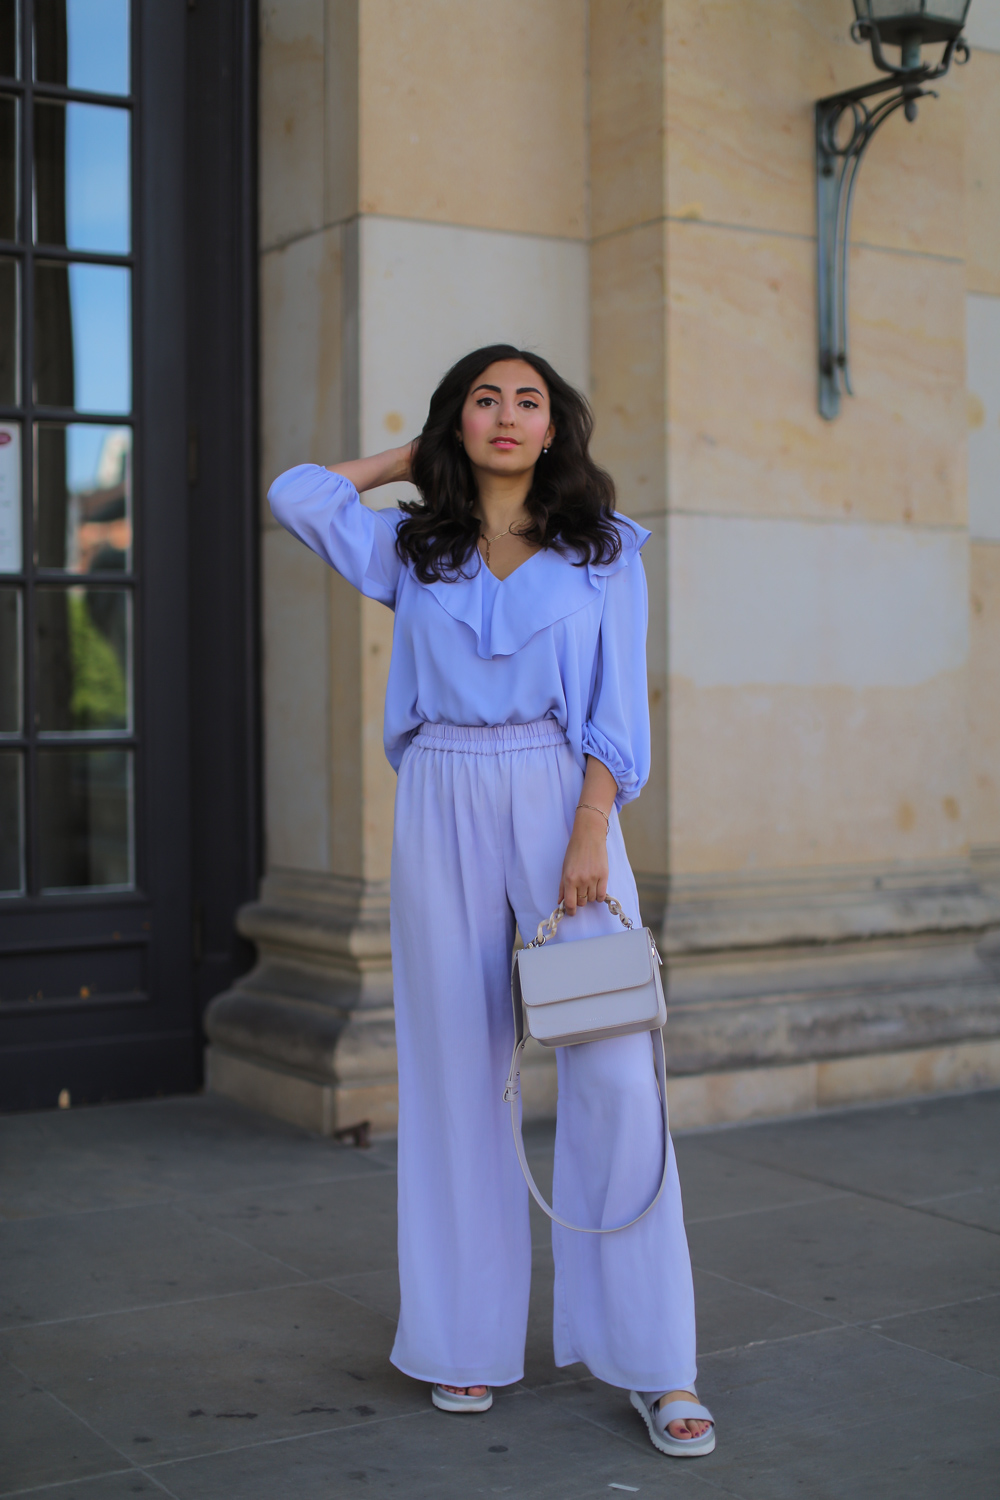 all lilac outfit palazzo pants styling lavender cai jewellery schmuck pearly ear cuff summer style 2020 berlin samieze